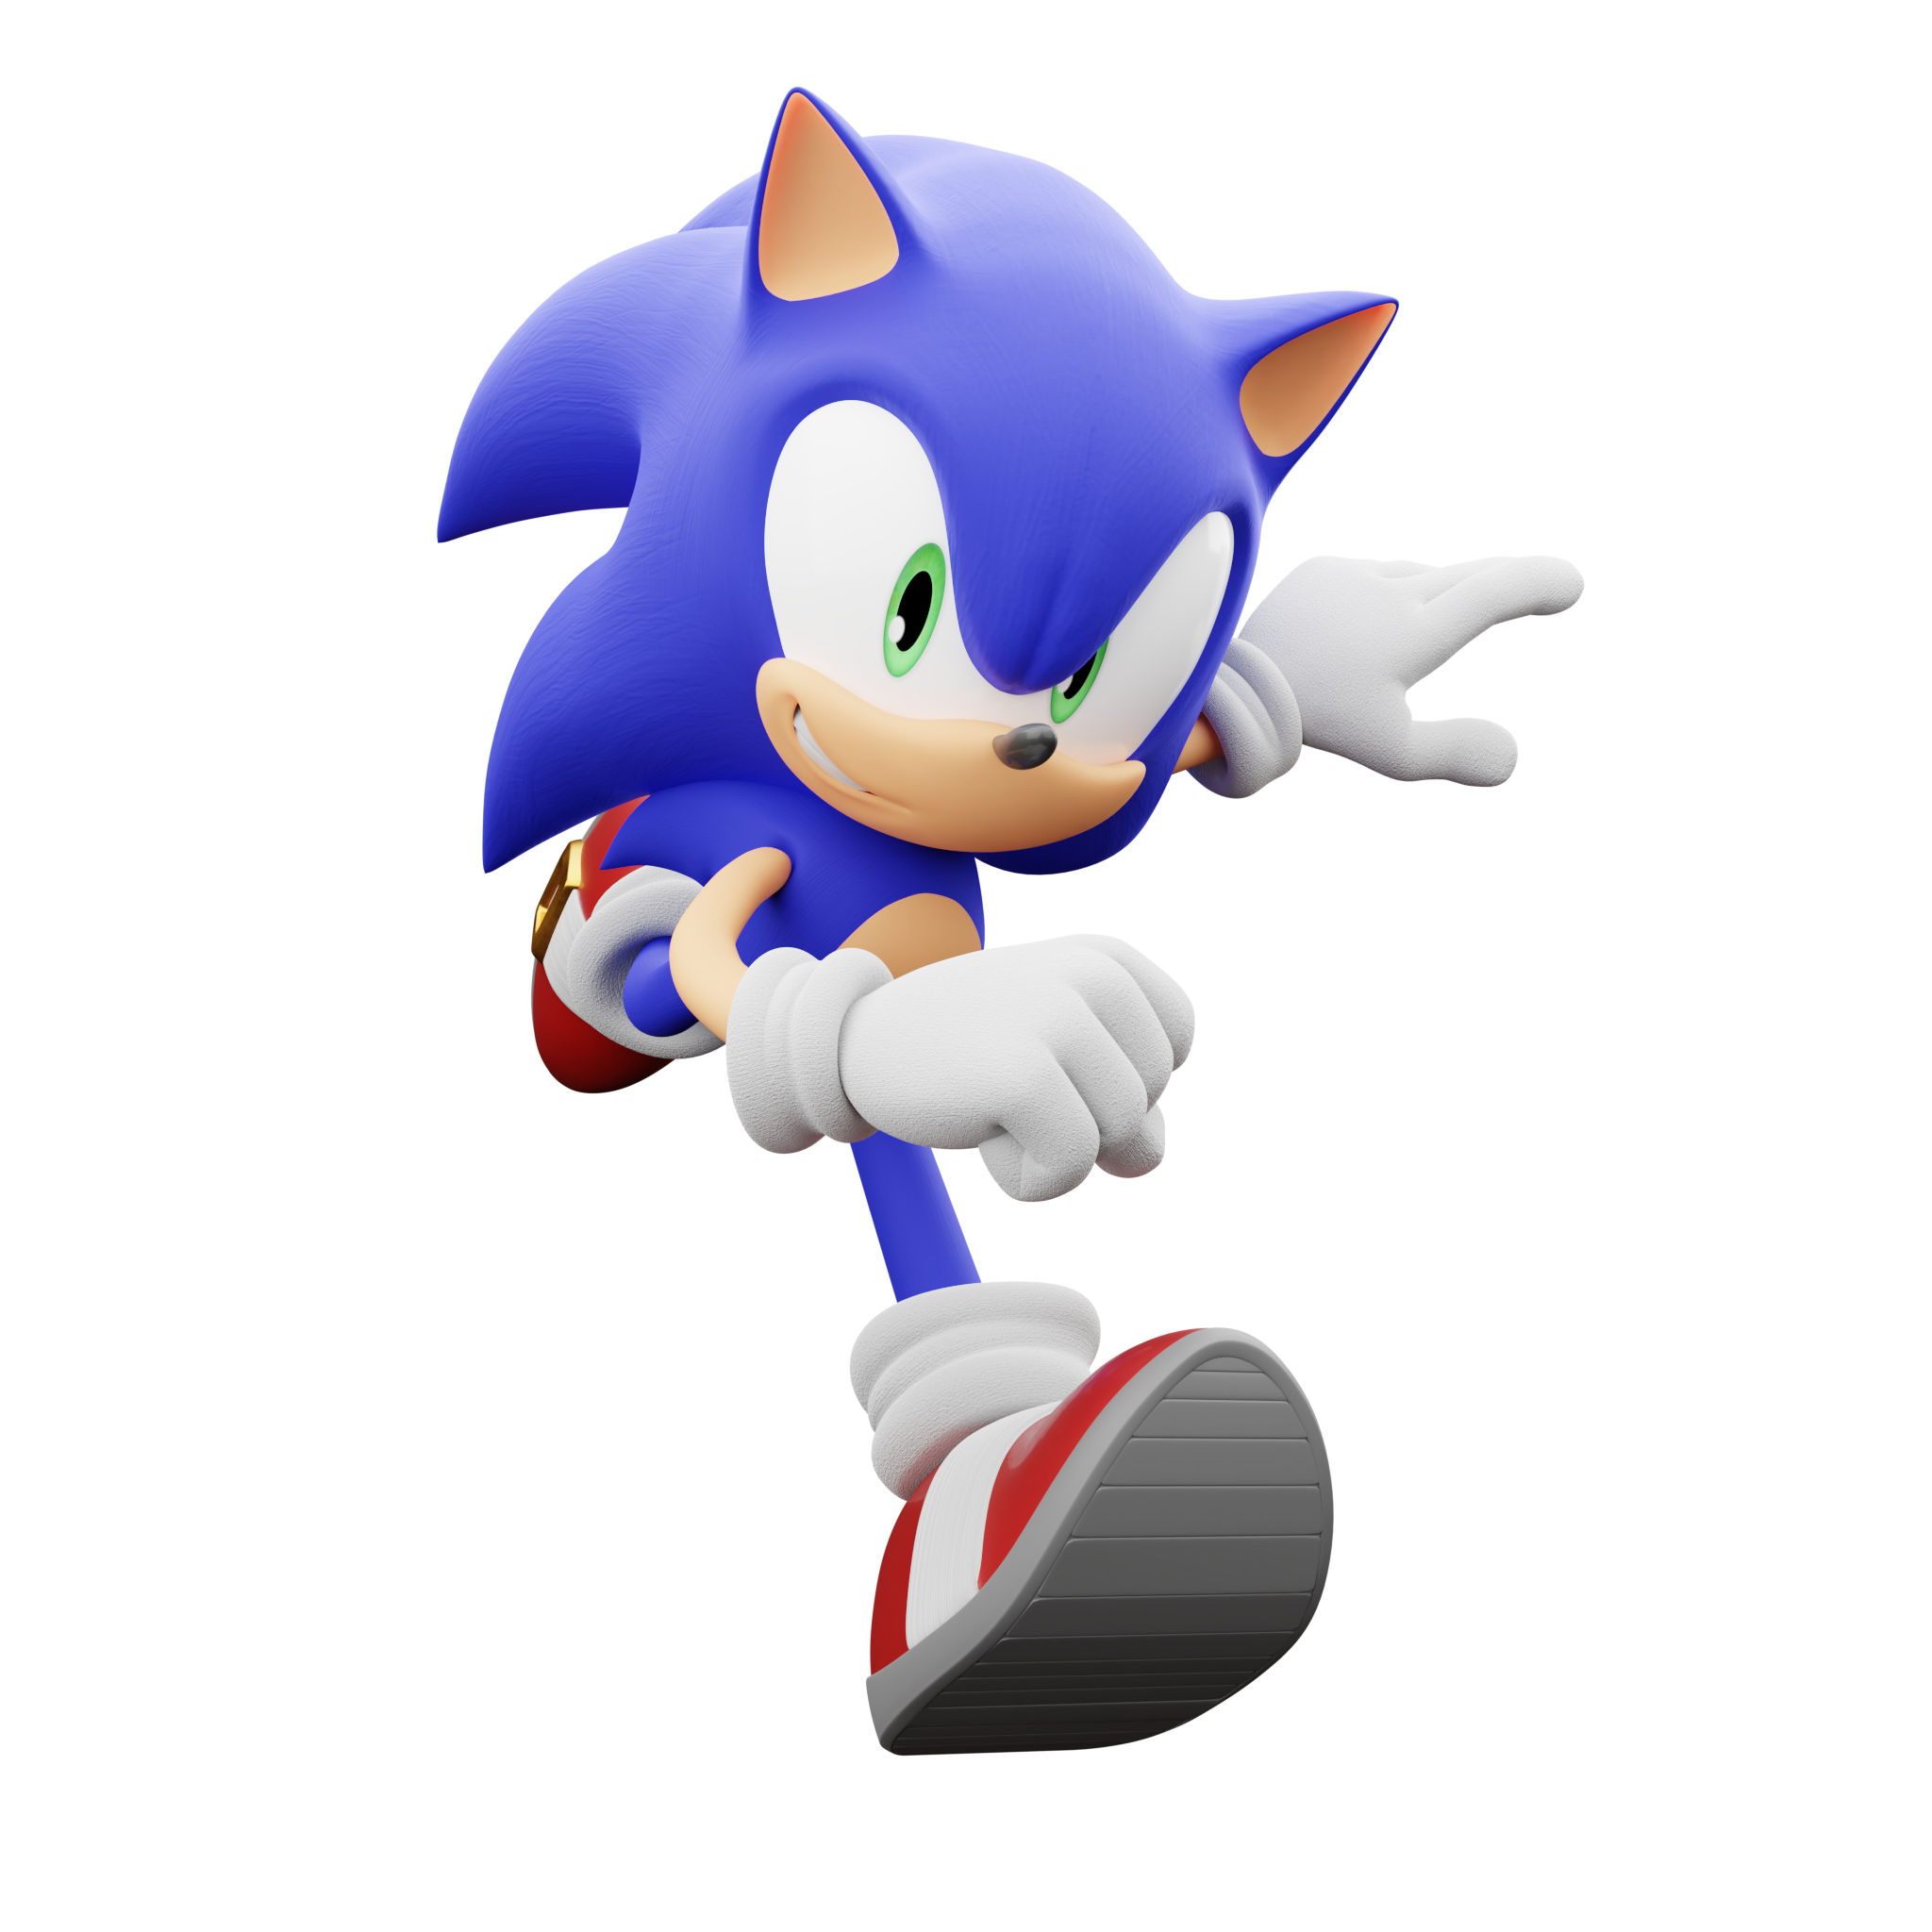 Classic Sonic (Render) by yessing on DeviantArt